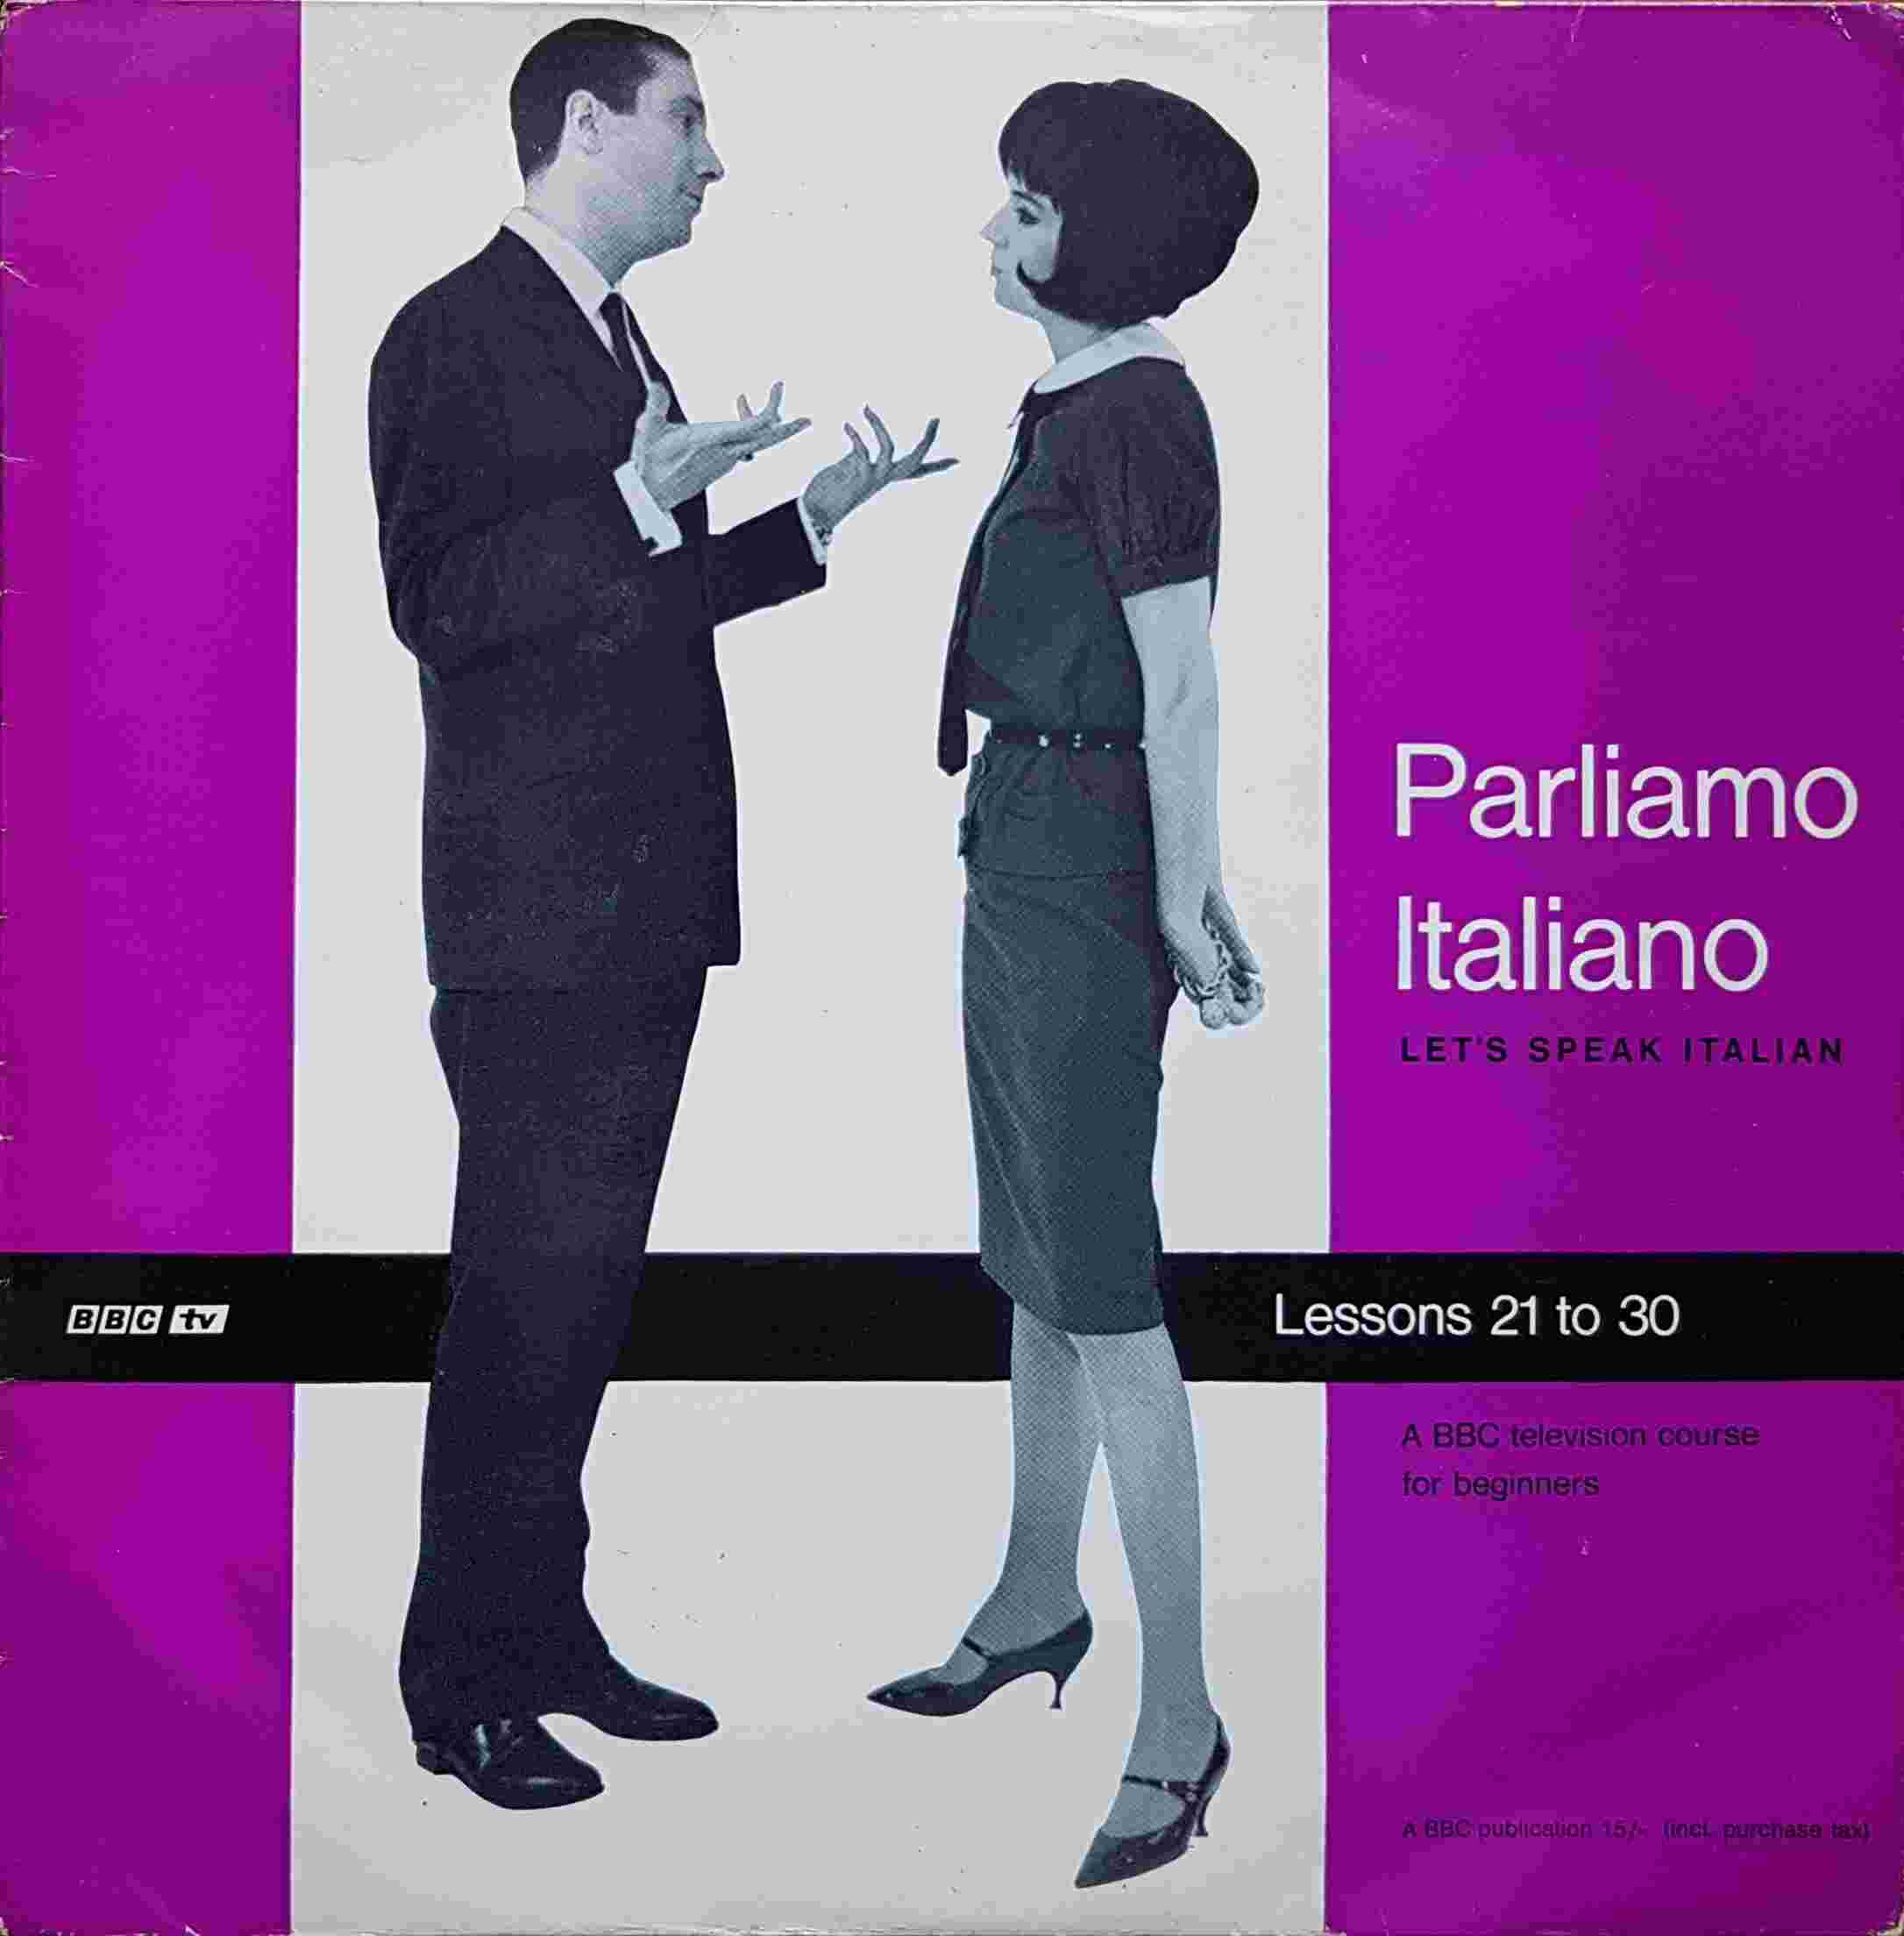 Picture of Parliamo Italiano - Let's Speak Italian lessons 21 - 30 by artist Toni Cerutti from the BBC albums - Records and Tapes library